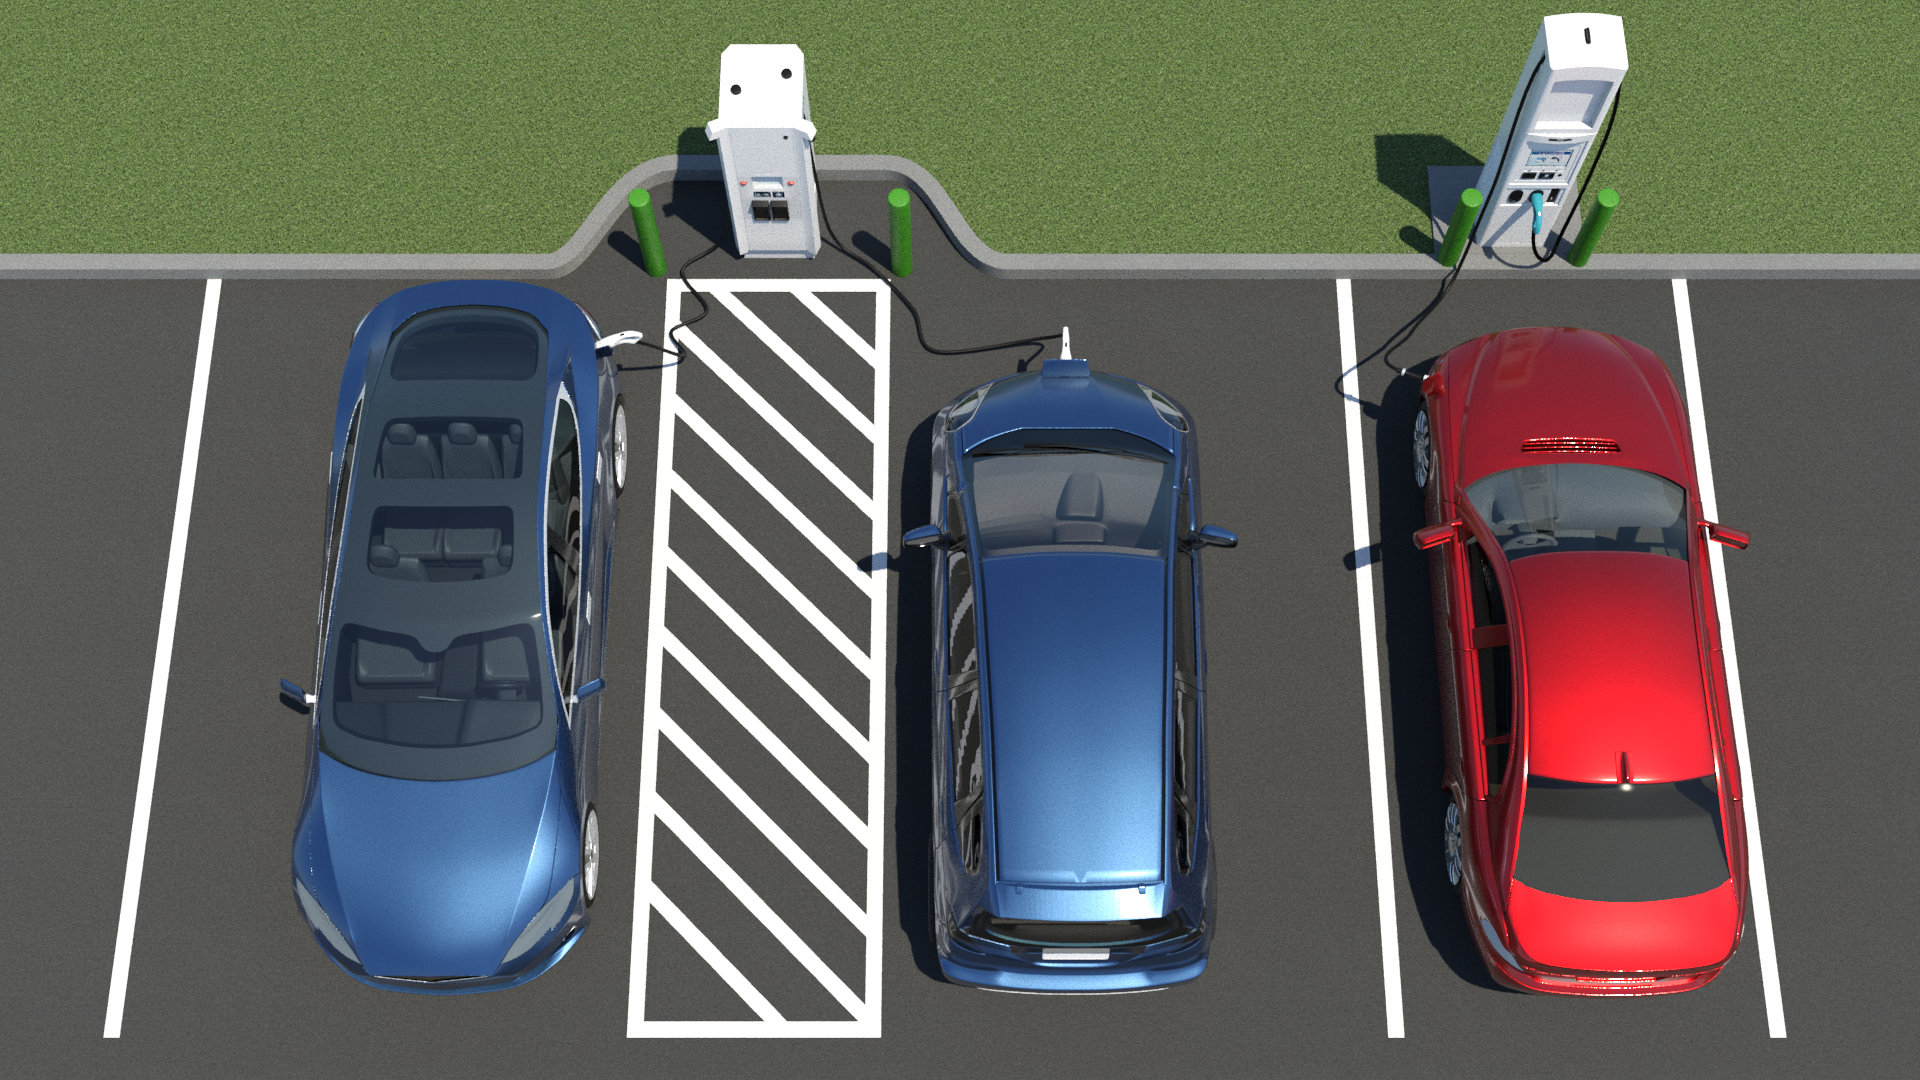 One EV charging station with 2 EV chargers. The left EV charger is beyond the access aisle and has 2 charging ports and is plugged into 2 blue vehicles simultaneously. The right EV charger has 2 connectors, and one connector is connected to a red vehicle.